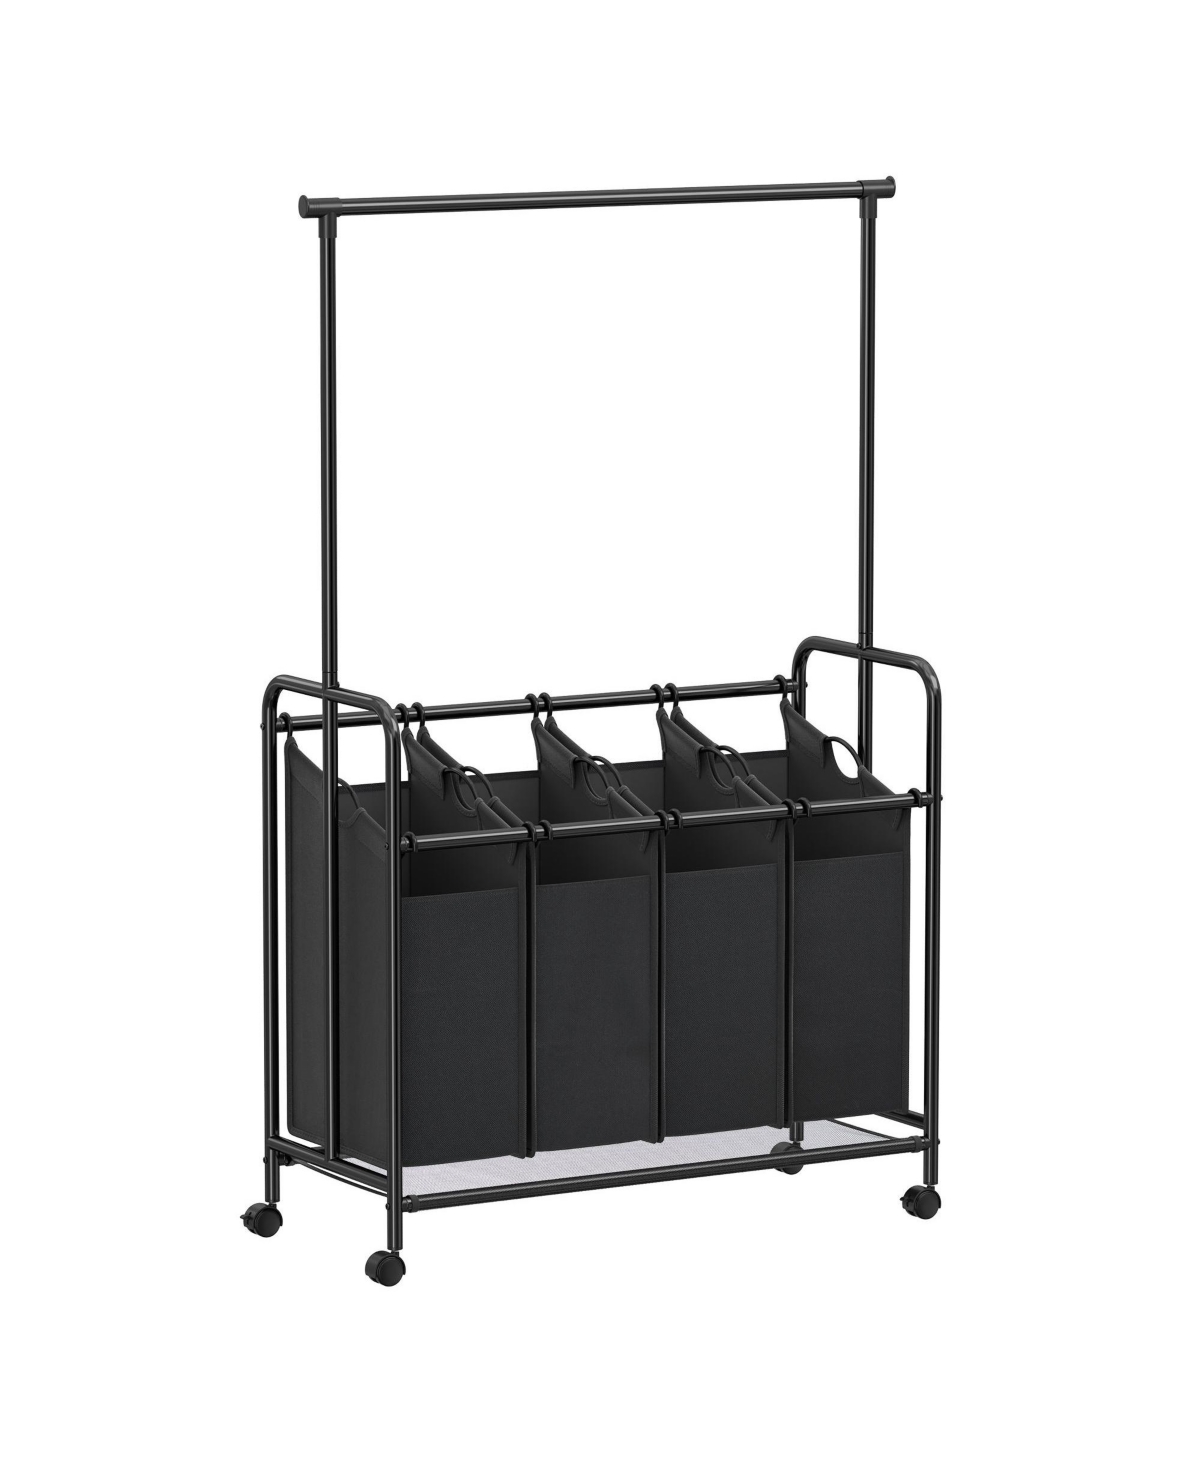 Laundry Cart With Wheels & Hanging Bar - Black